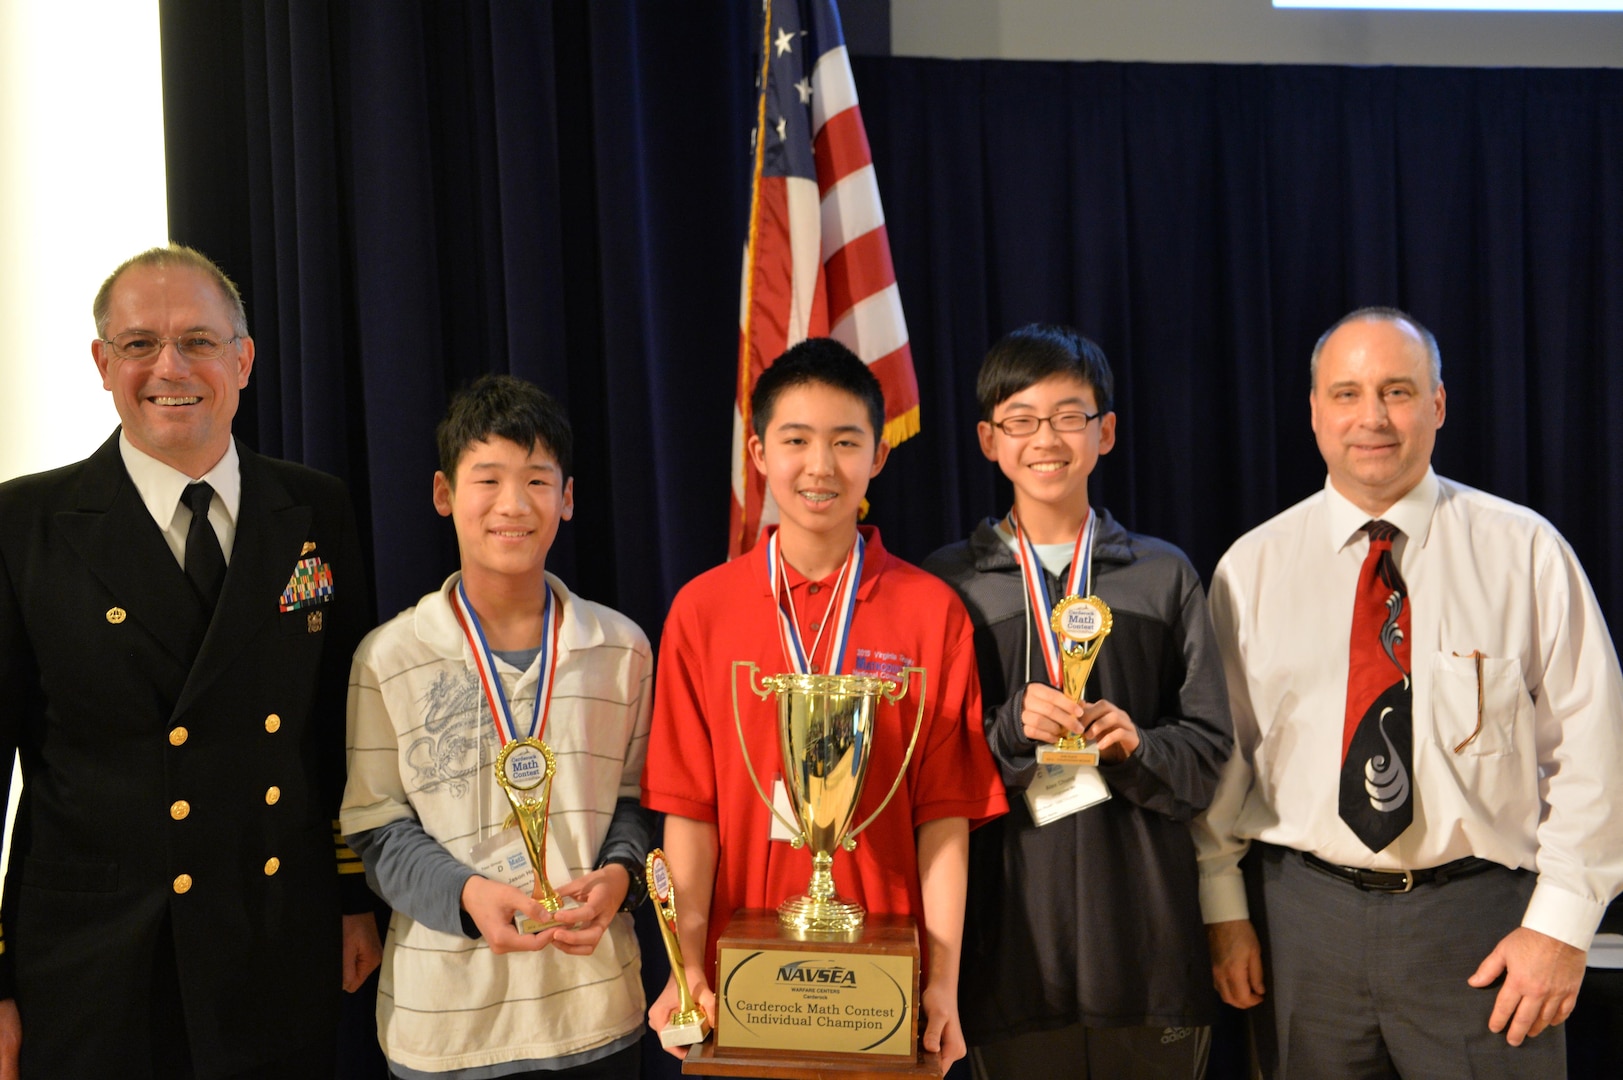 Seventh annual Carderock Math Contest at Naval Surface Warfare Center, Carderock Division in West Bethesda, Md., March 18, 2016. (U.S. Navy photo by James Contreras/Released)